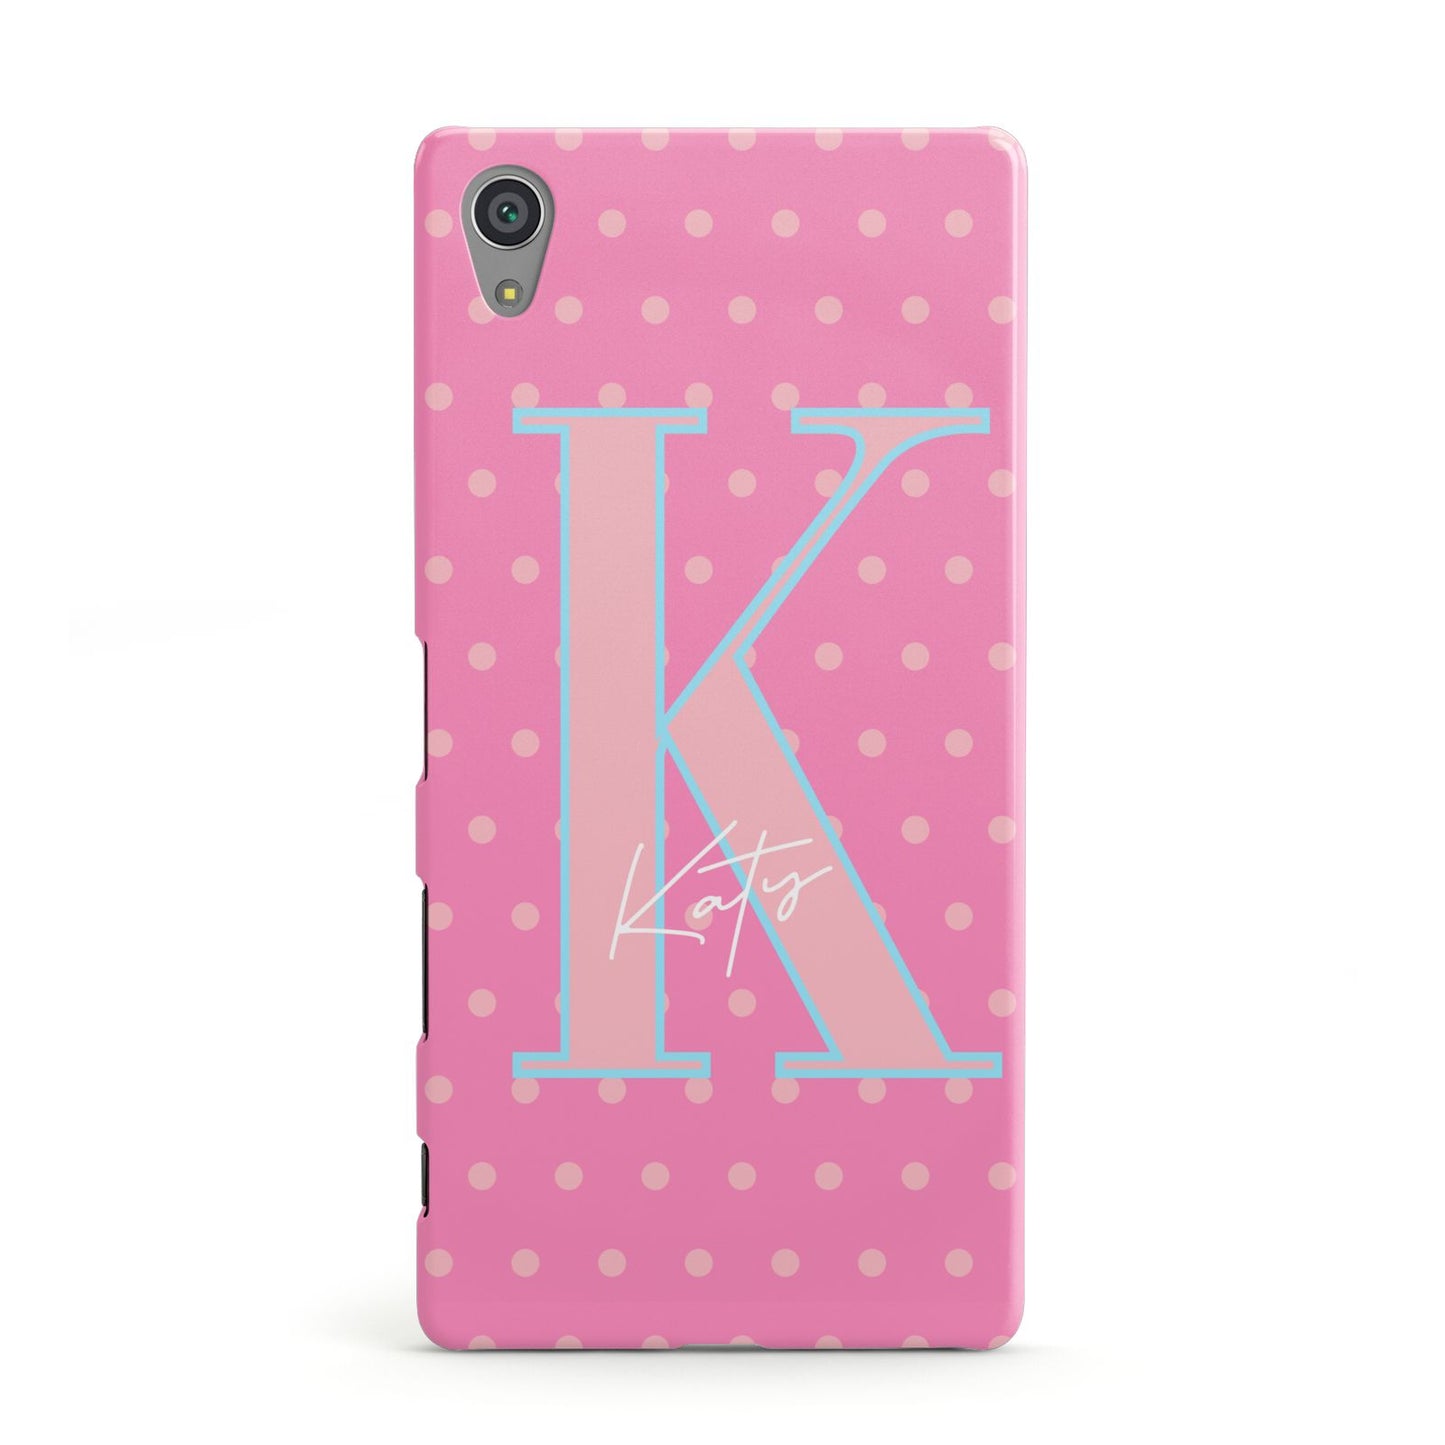 Personalised Pink Dots Sony Xperia Case